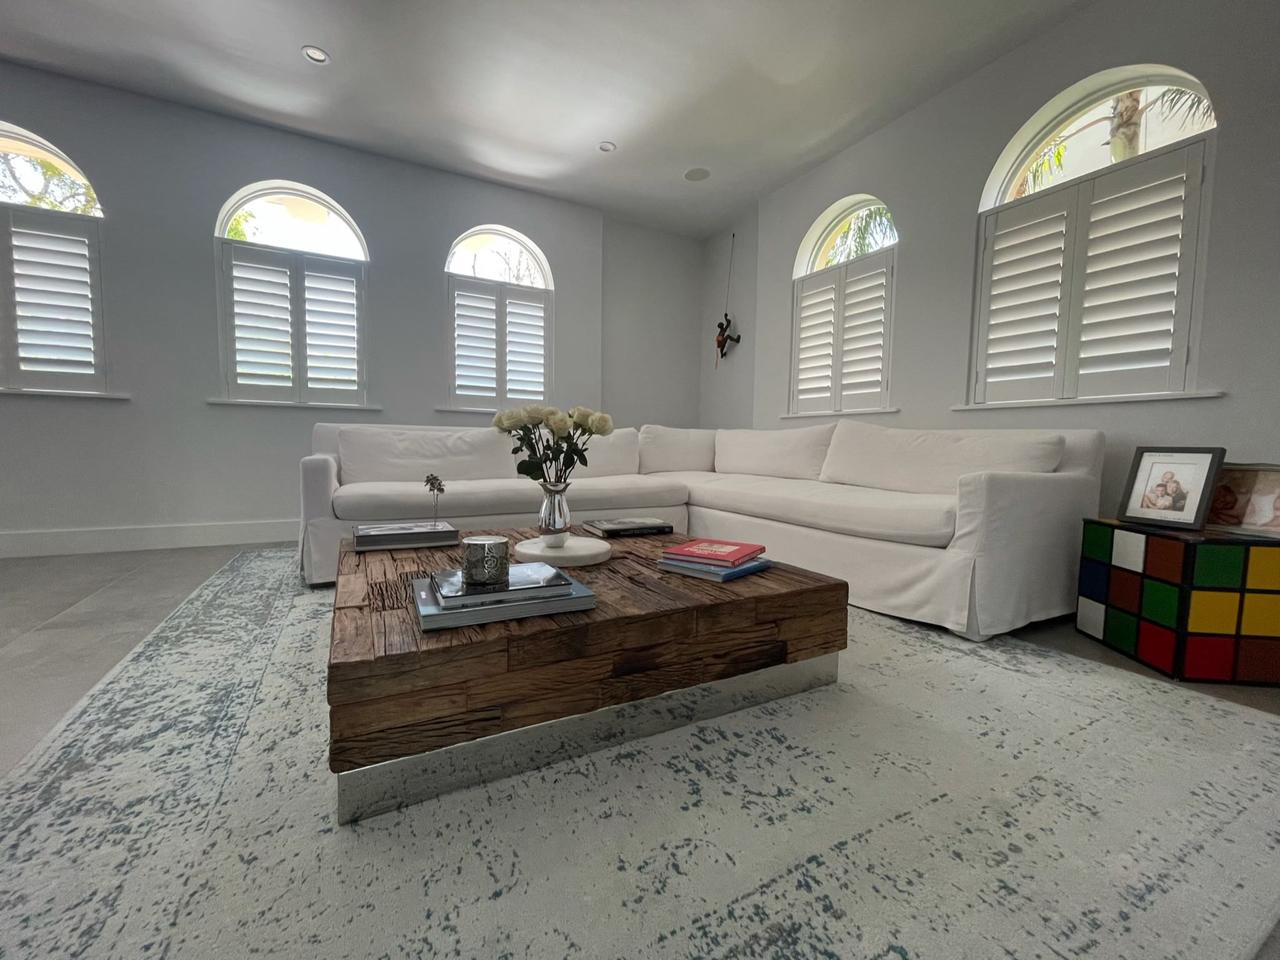 Arched windows with plantation shutters